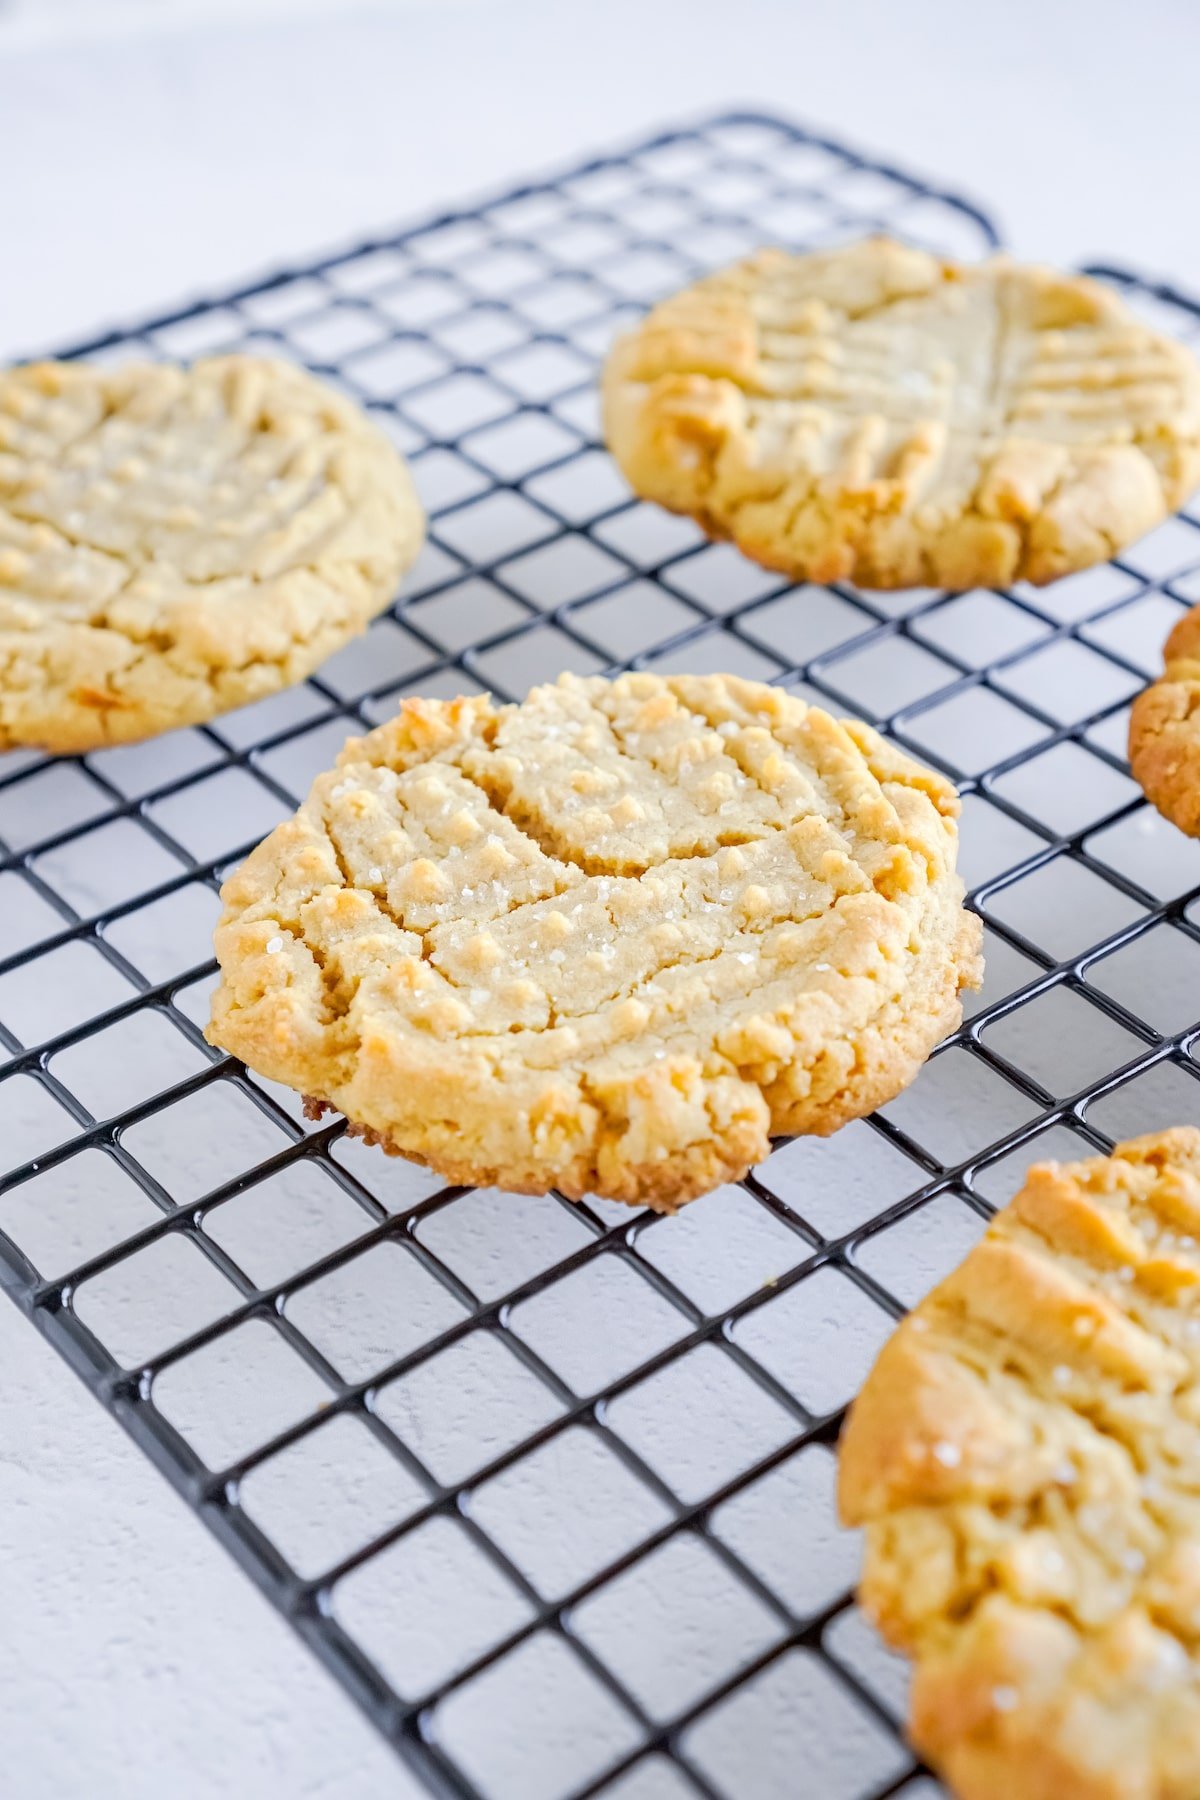 Baked peanut butter cookies on a cooling rack.